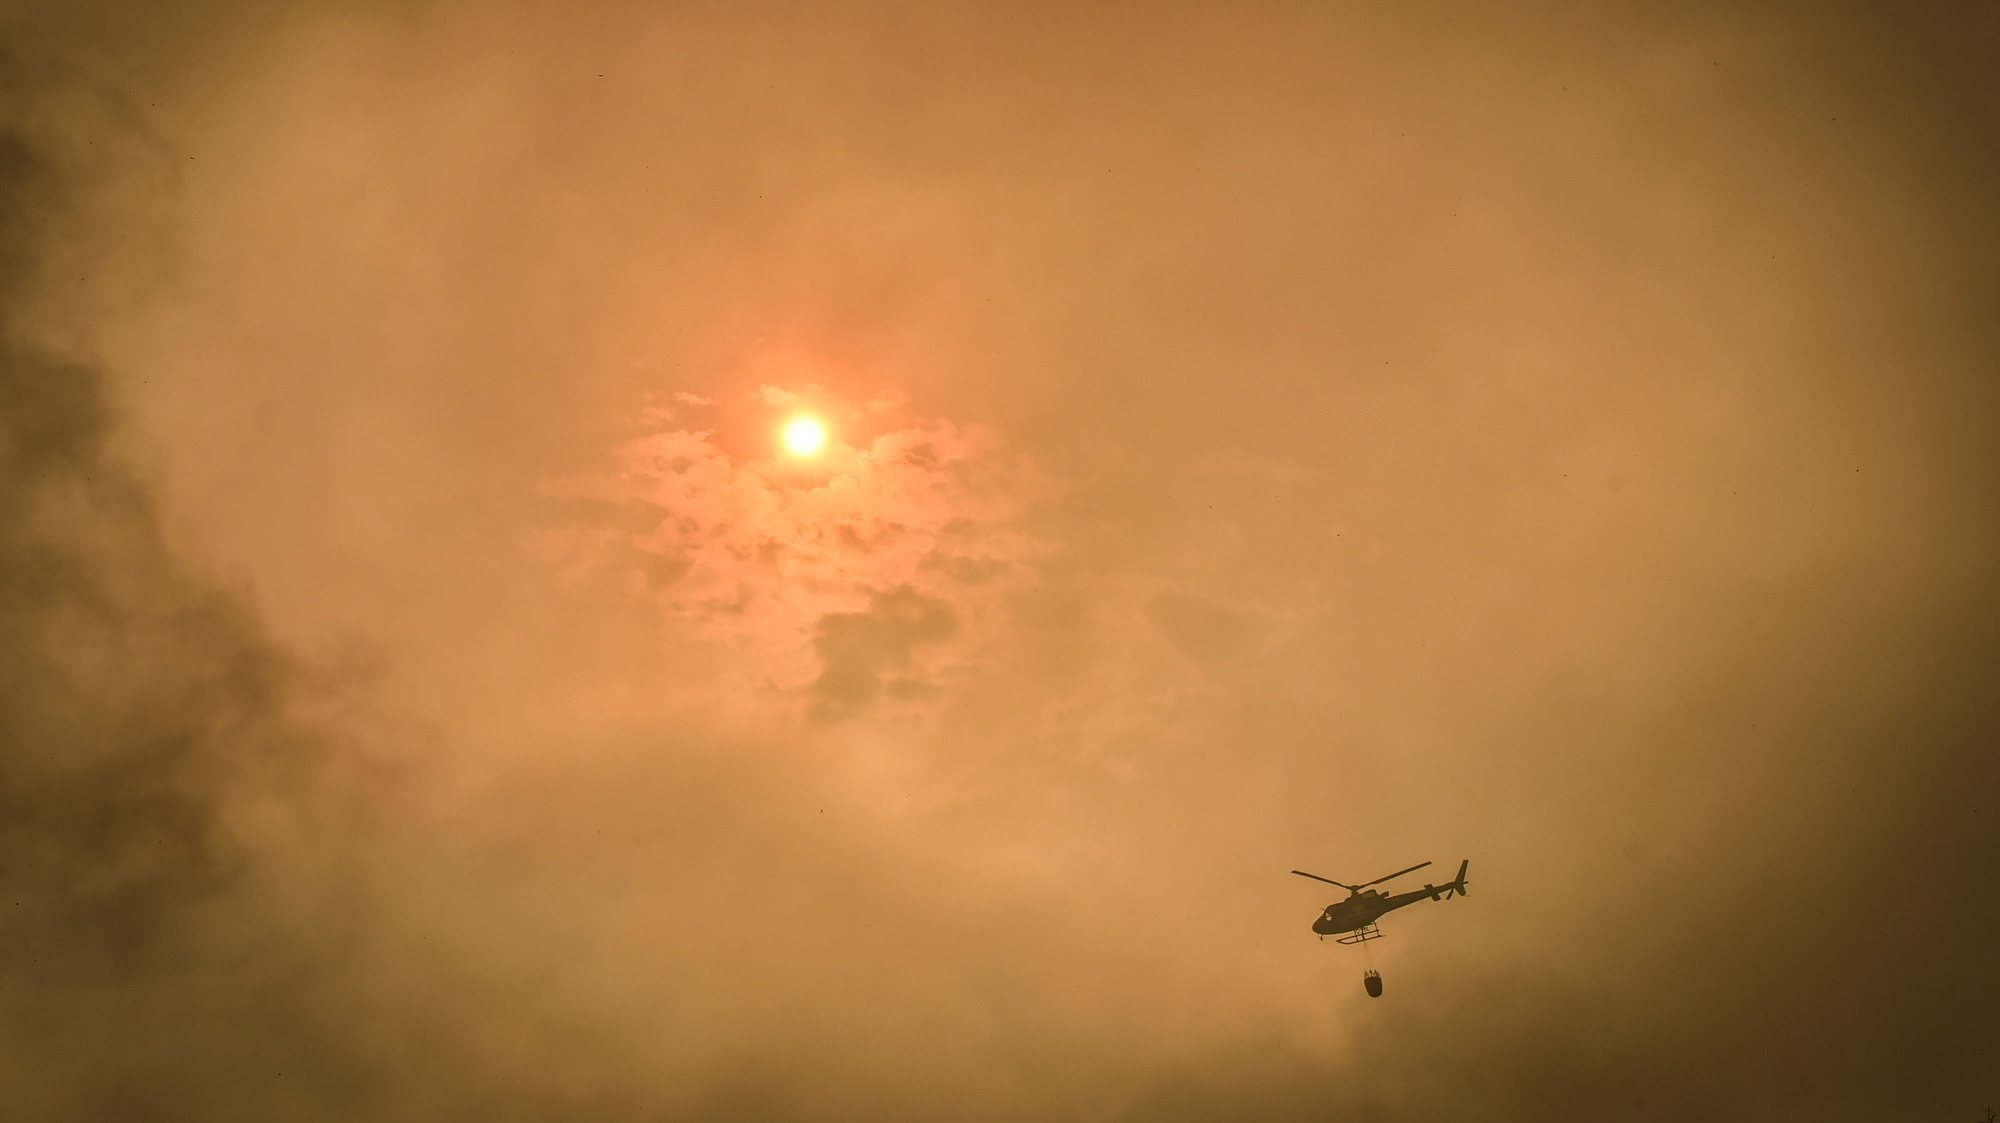 An helicopter fights a wildfire burning in the village of Aventeira, Alvaiázere, Portugal, July 12, 2022. The fire that cutted the A1 highway between Pombal and Leiria and surrounded the village of Aventeira (Alvaiázere) has 350 operatives, supported by 103 vehicles and two aircraft. NUNO ANDRE FERREIRA/LUSA